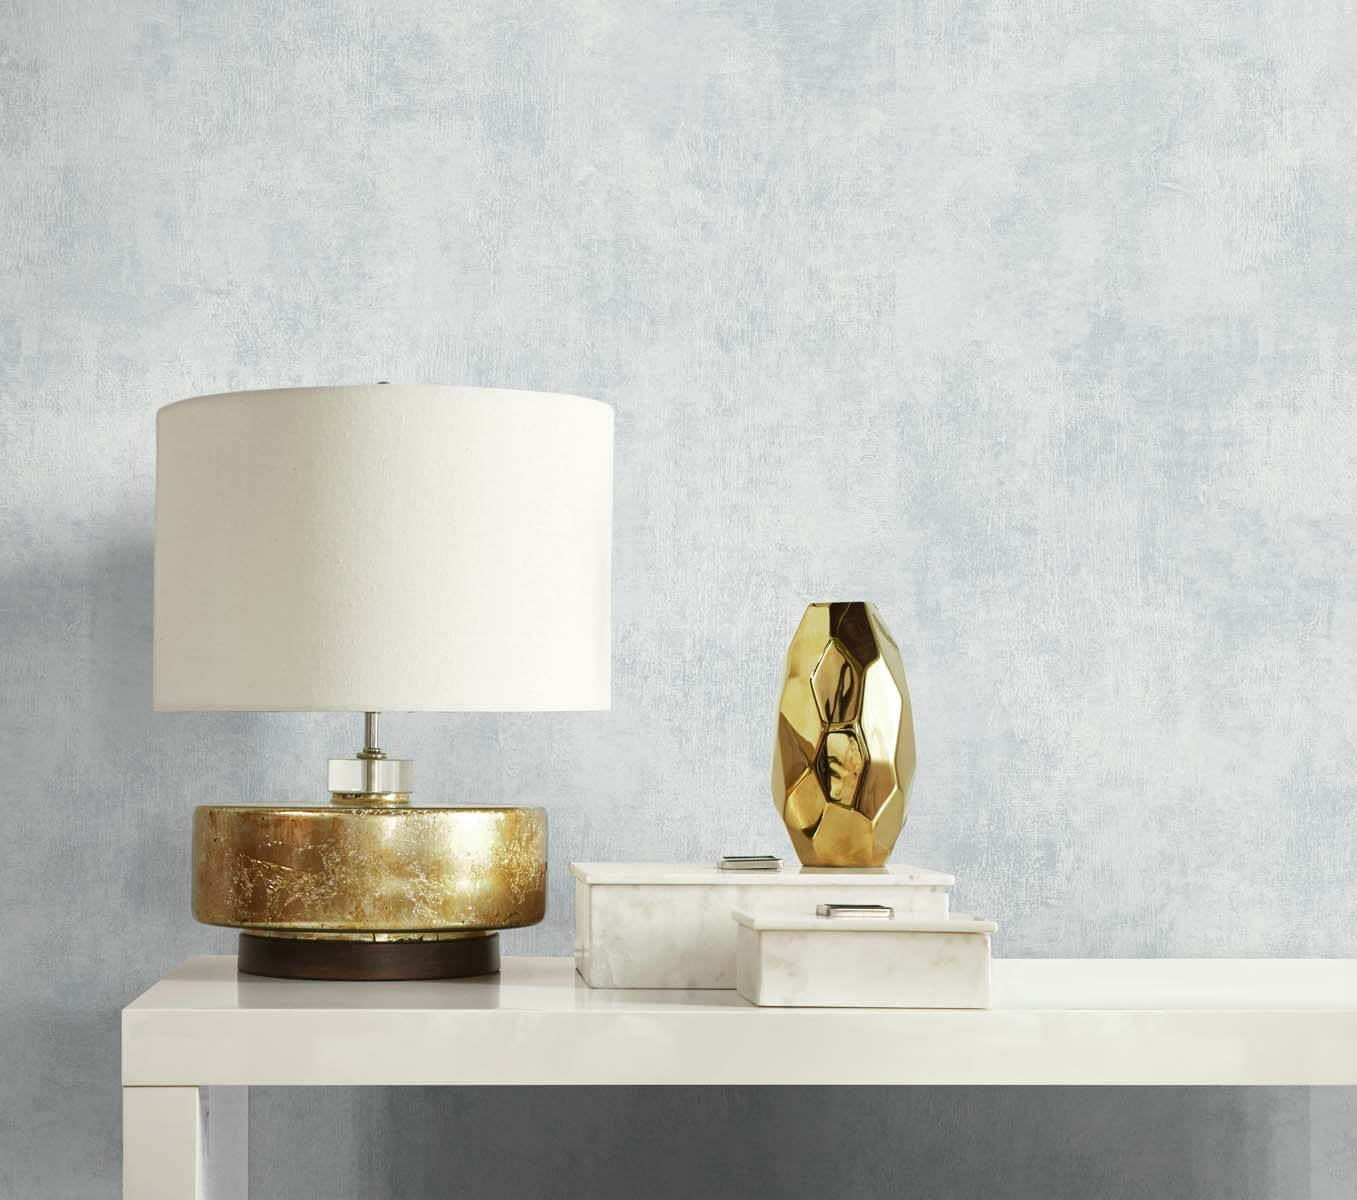 Seabrook White Heron Claire Faux Suede Wallpaper - Ice Pearl